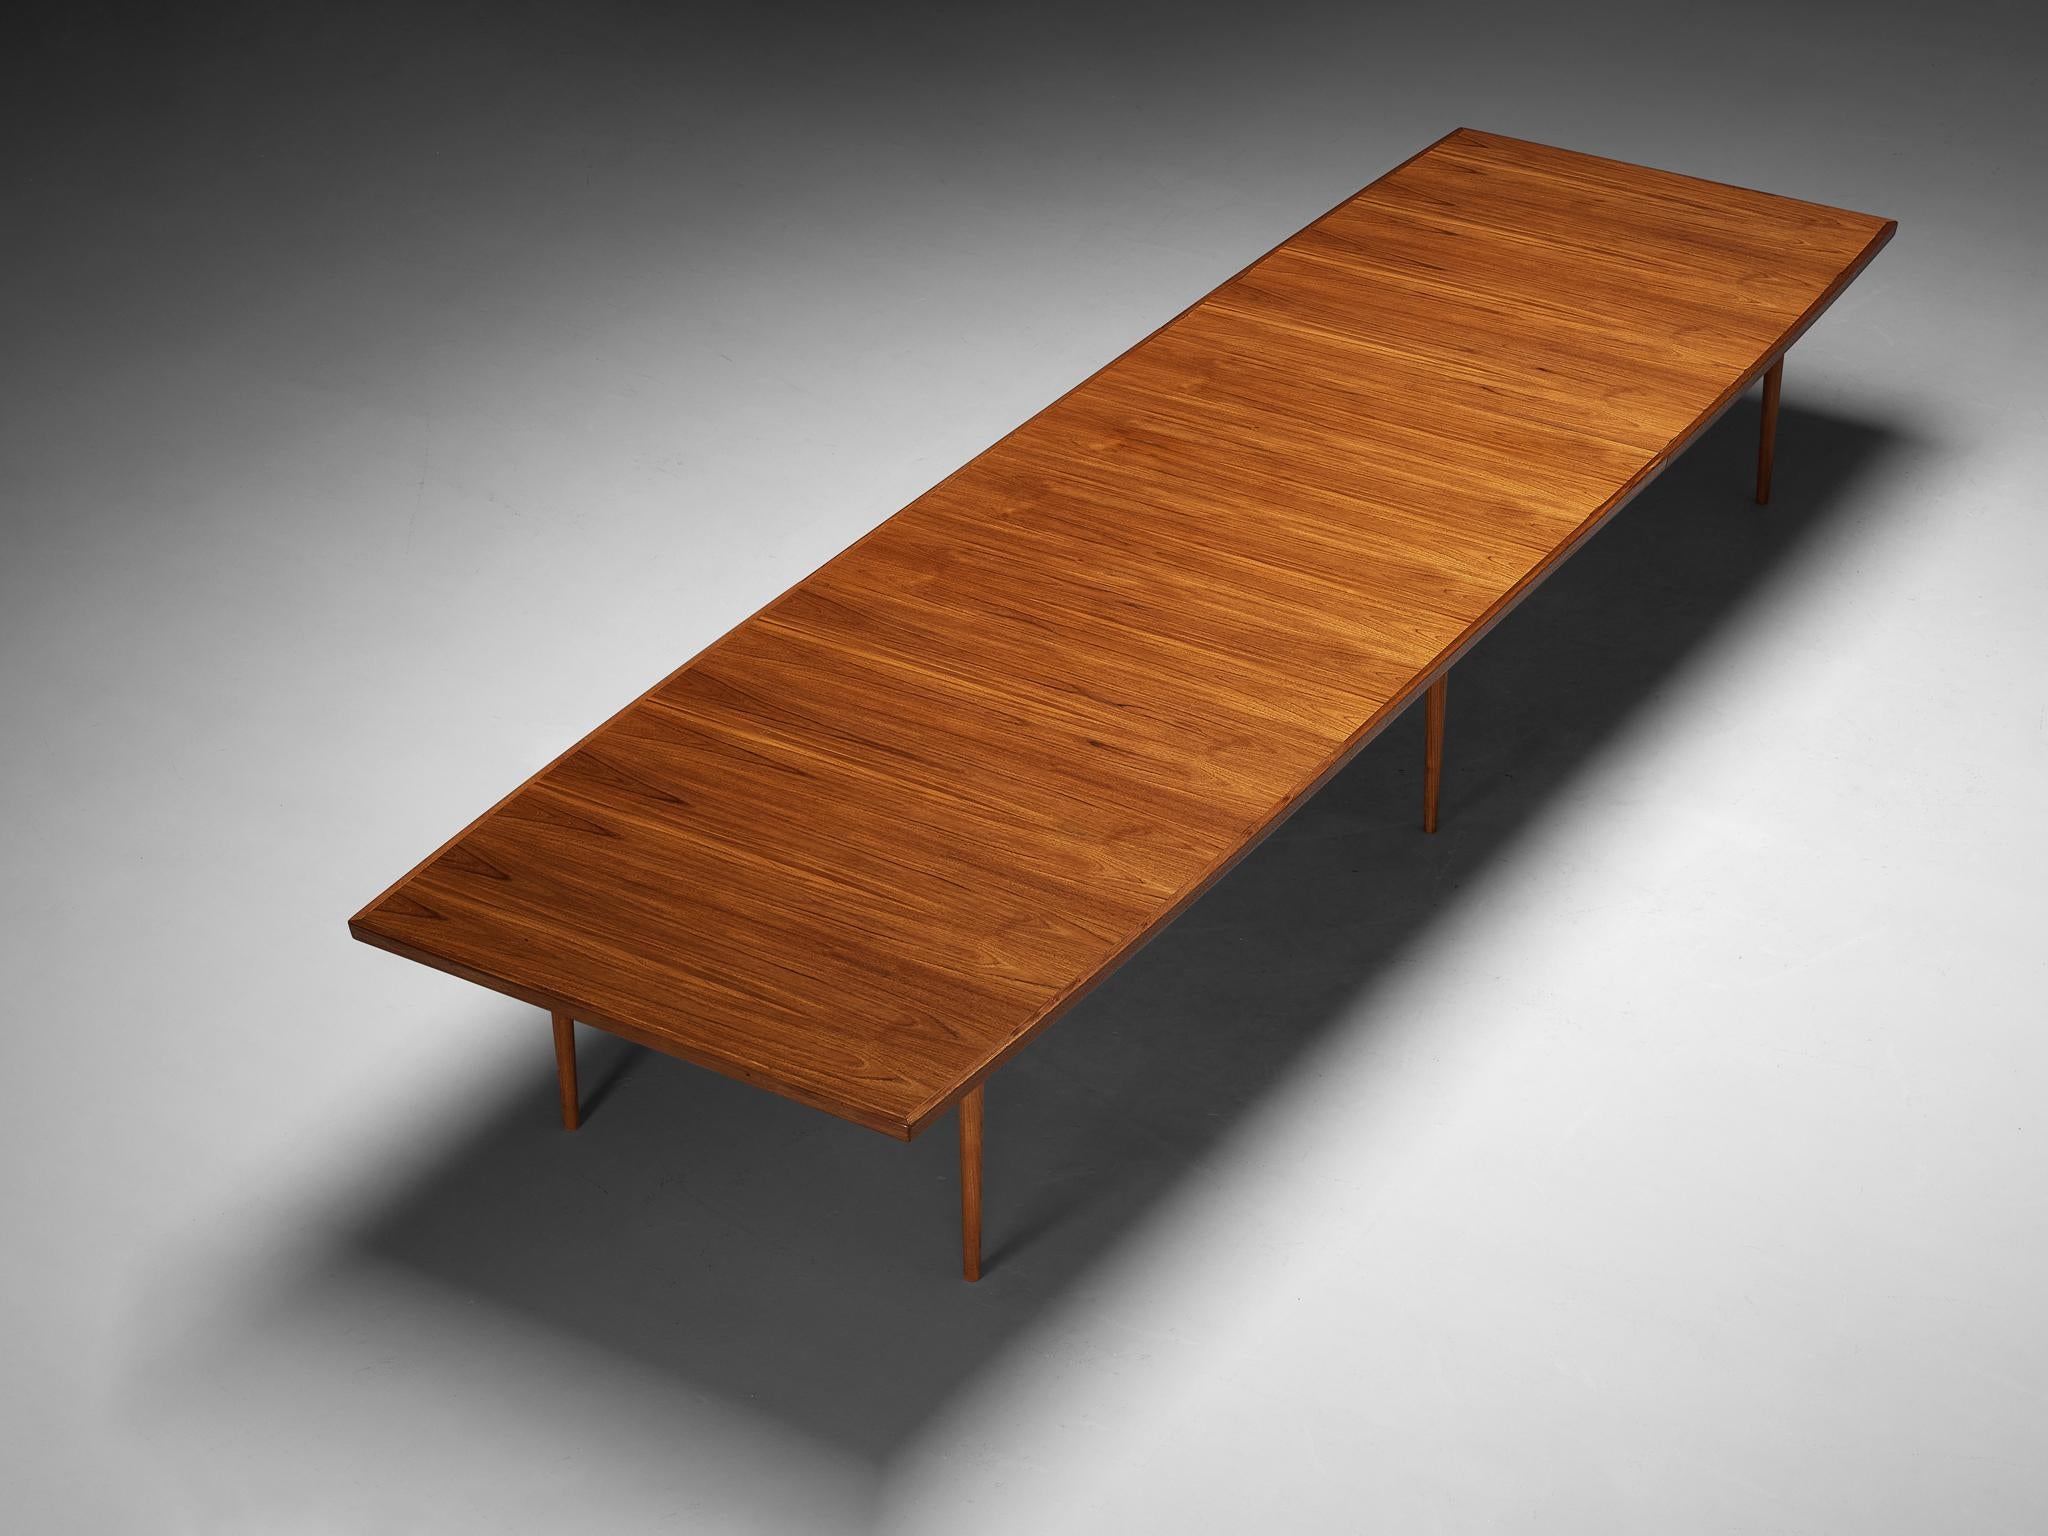 Arne Vodder for Sibast, conference table, teak, Denmark, 1960s

Elegant and simplistic sizable table by Arne Vodder for Sibast. This large conference table has an impressive size with its 16 ft in length. The table consists of a boat shaped top